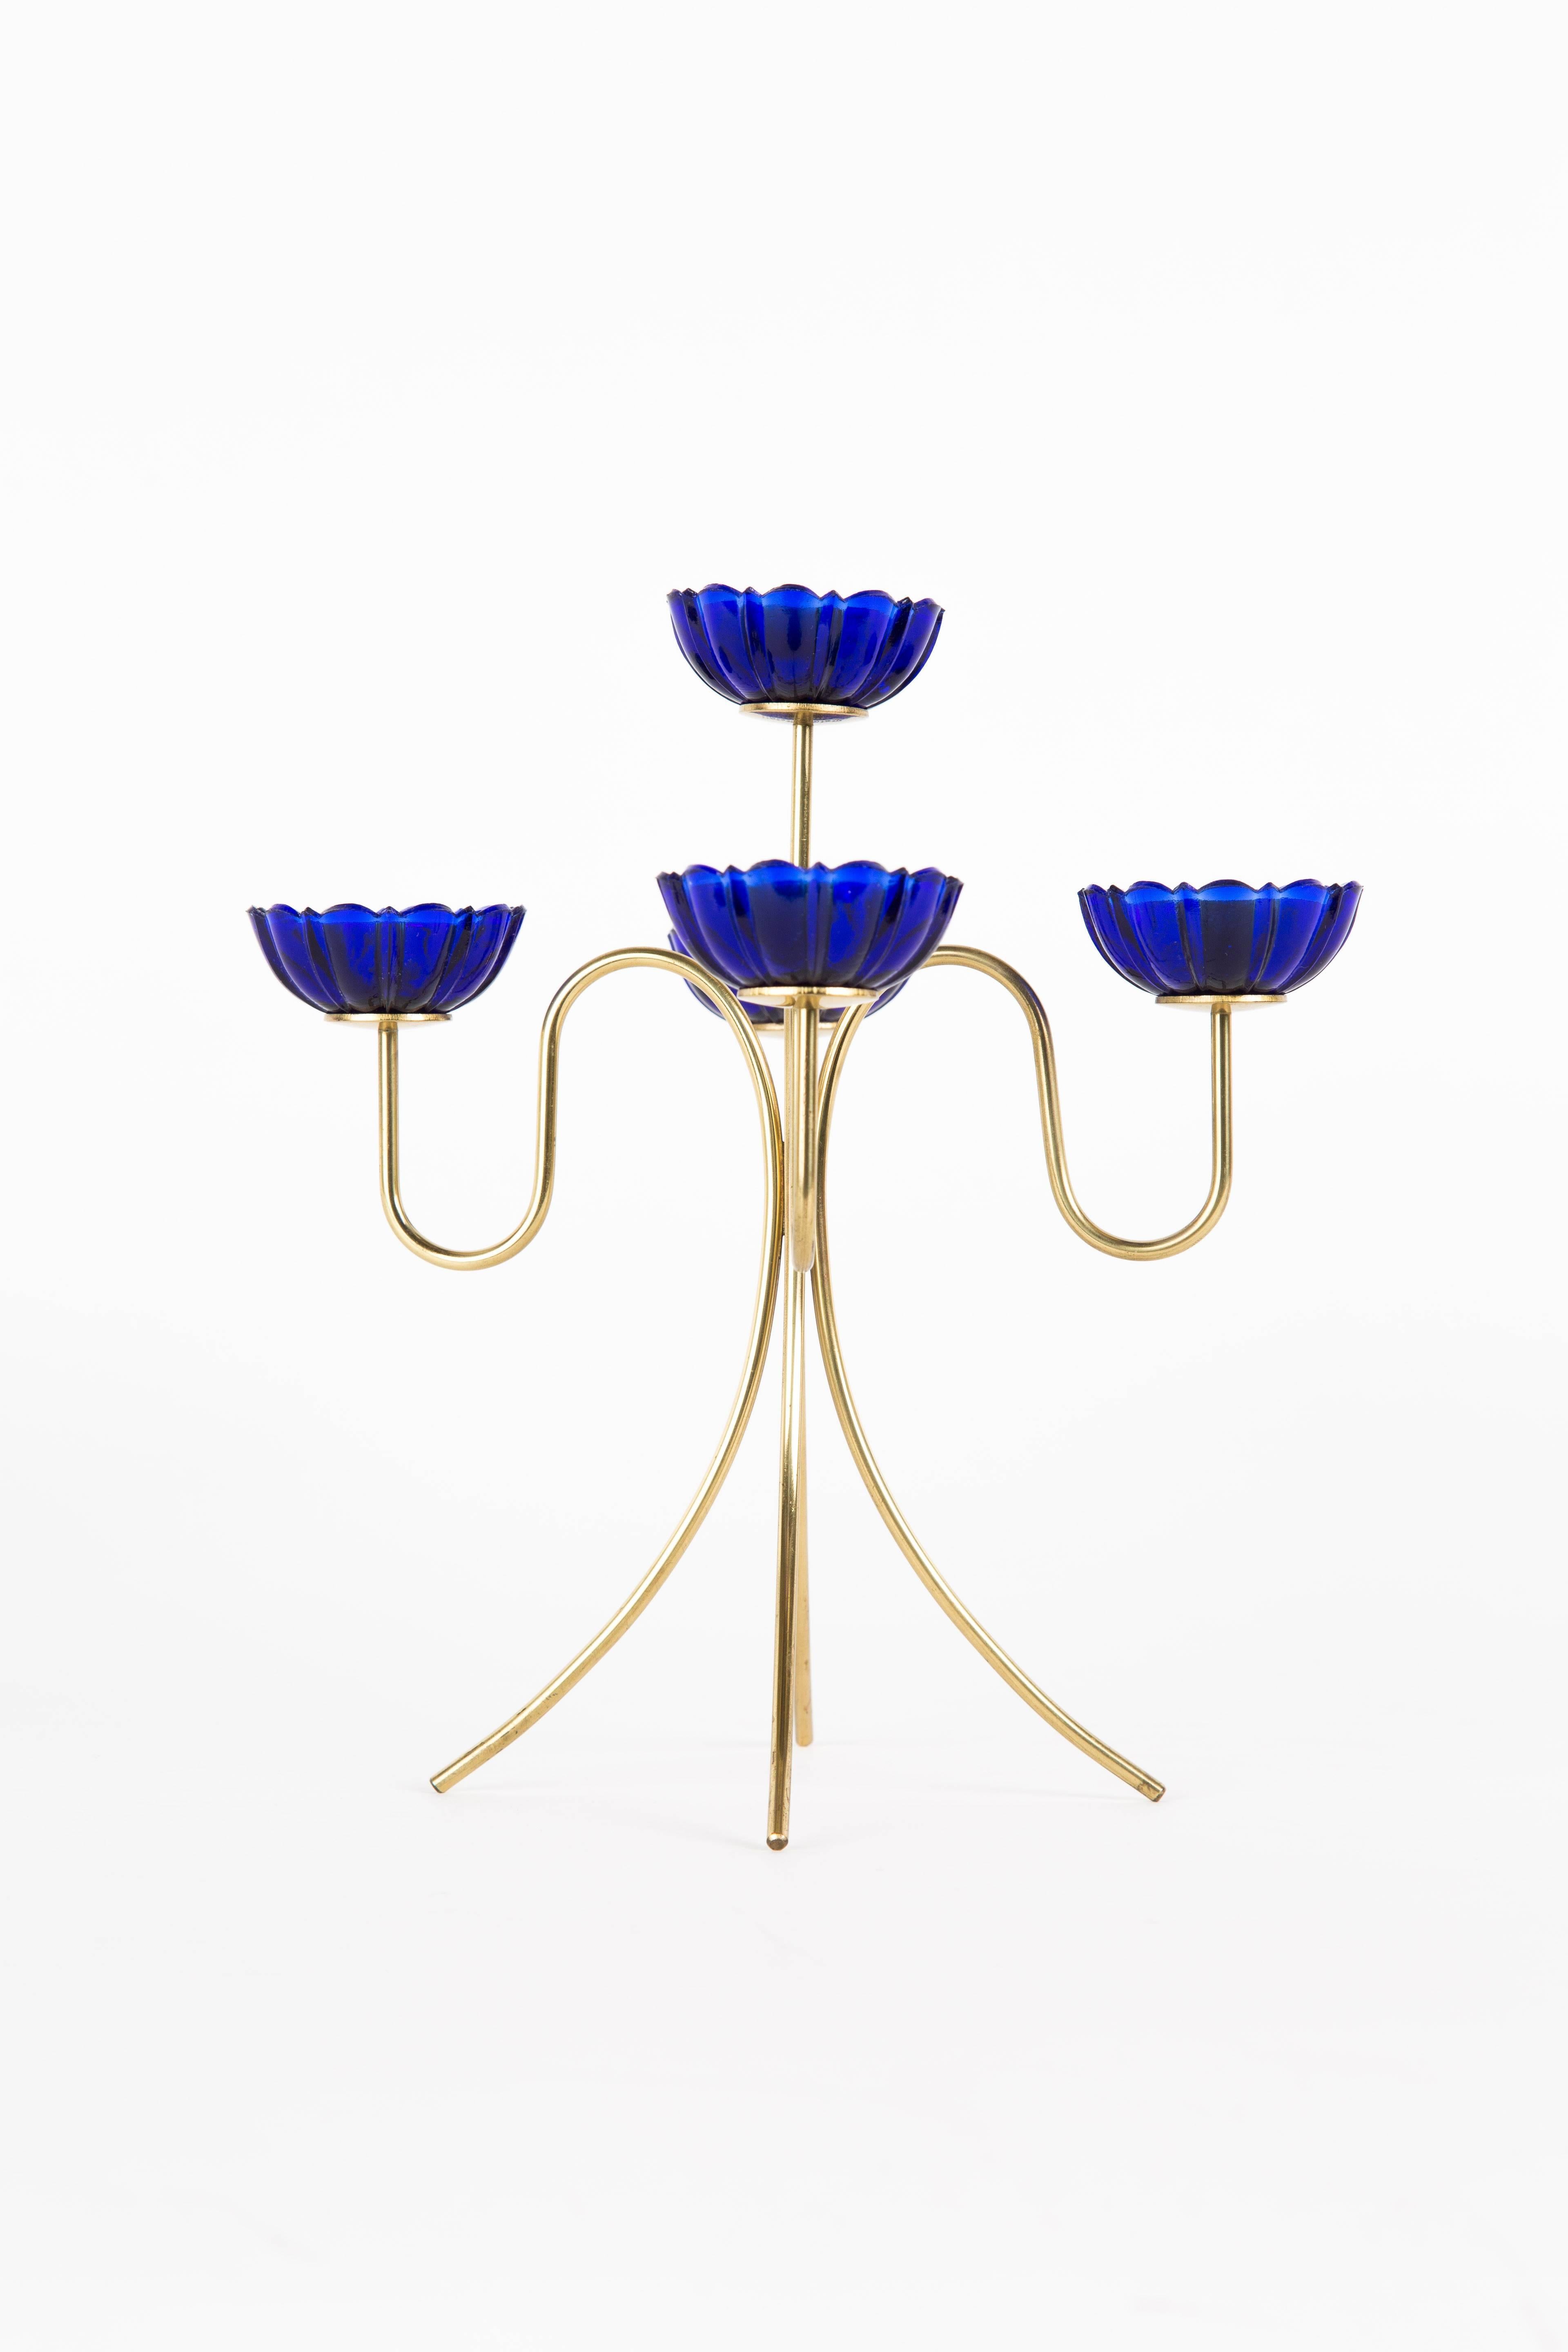 GUNNAR ANDER CANDLE HOLDER for Ystad Metall with brass and artglas in blue In Good Condition For Sale In LA Arnhem, NL